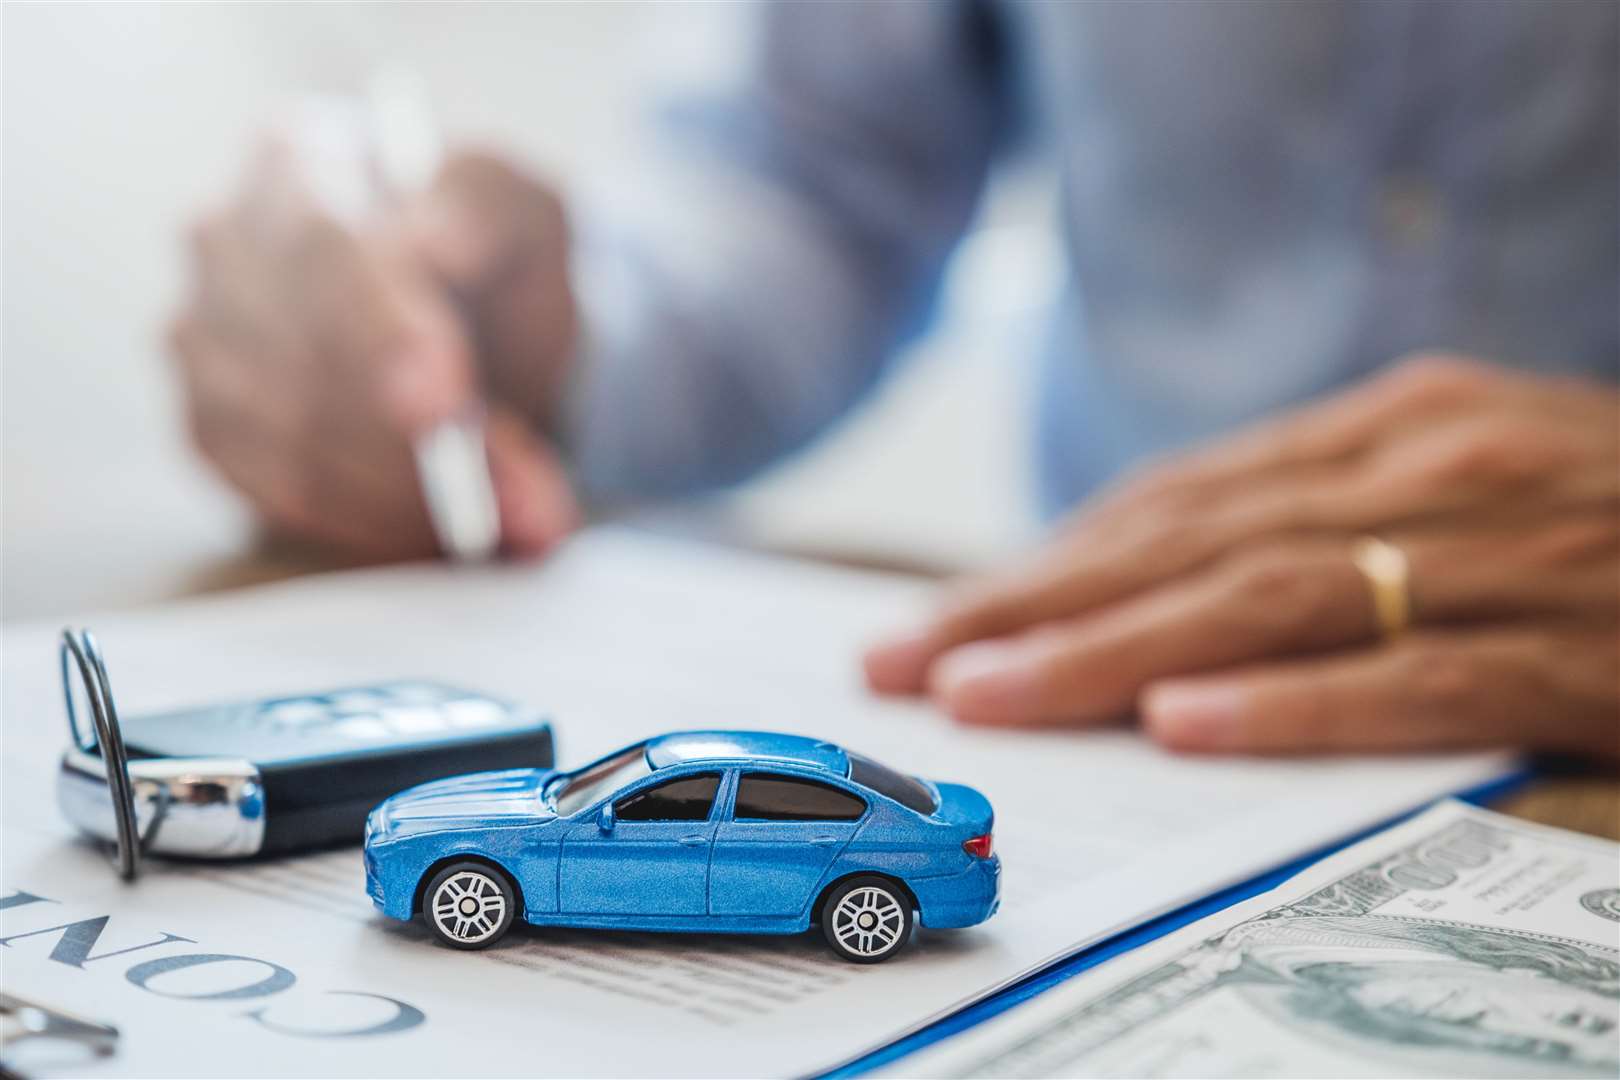 Remember to keep your auto insurer informed of any changes in your situation.